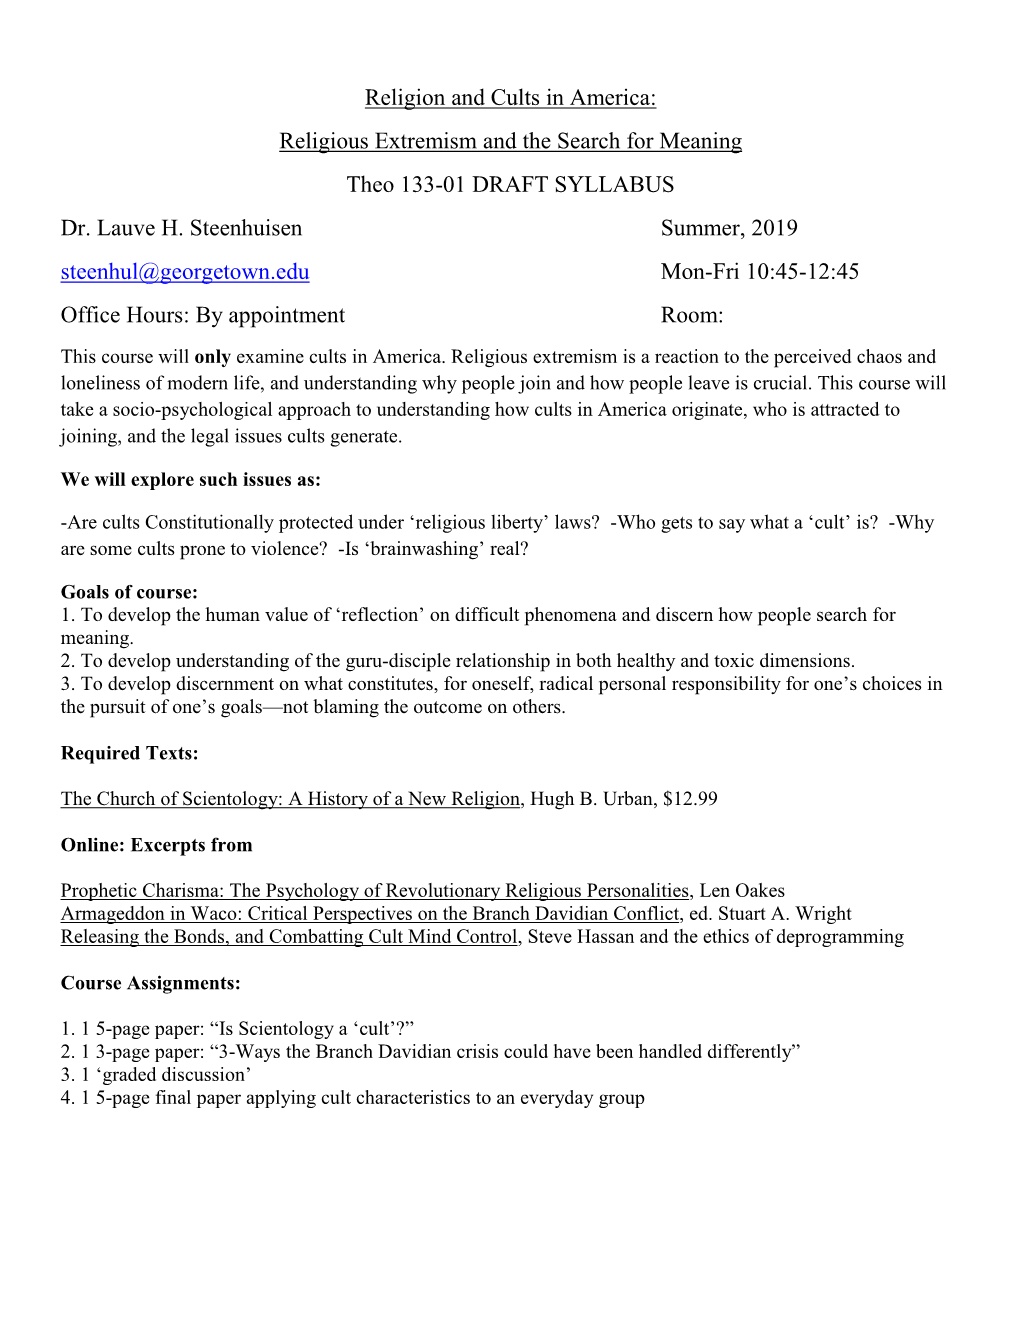 Religion and Cults in America: Religious Extremism and the Search for Meaning Theo 133-01 DRAFT SYLLABUS Dr